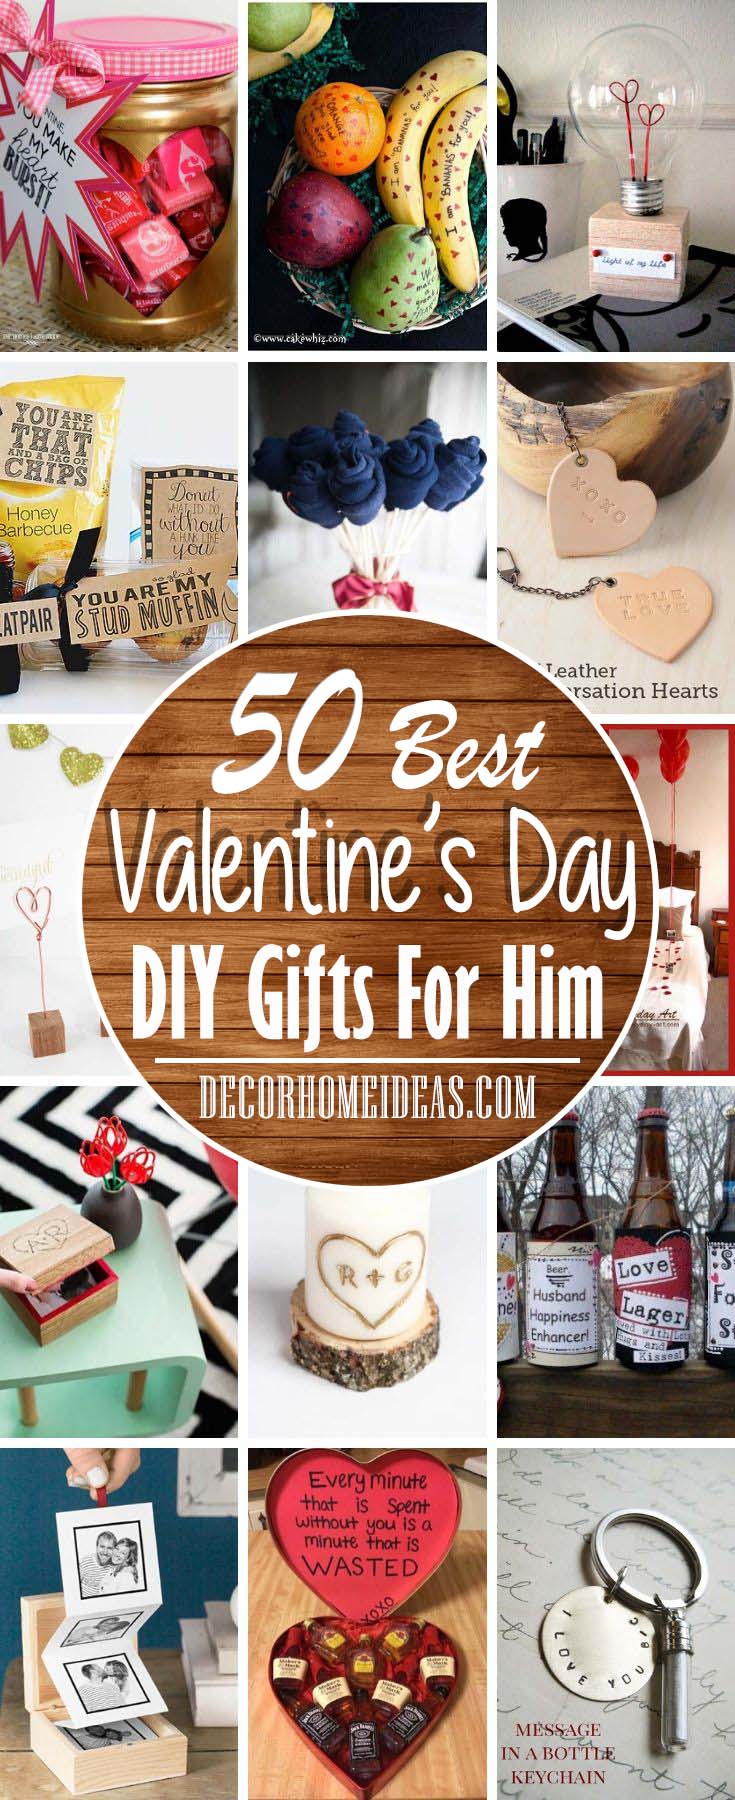 50 Best Diy Valentine S Day Gifts For